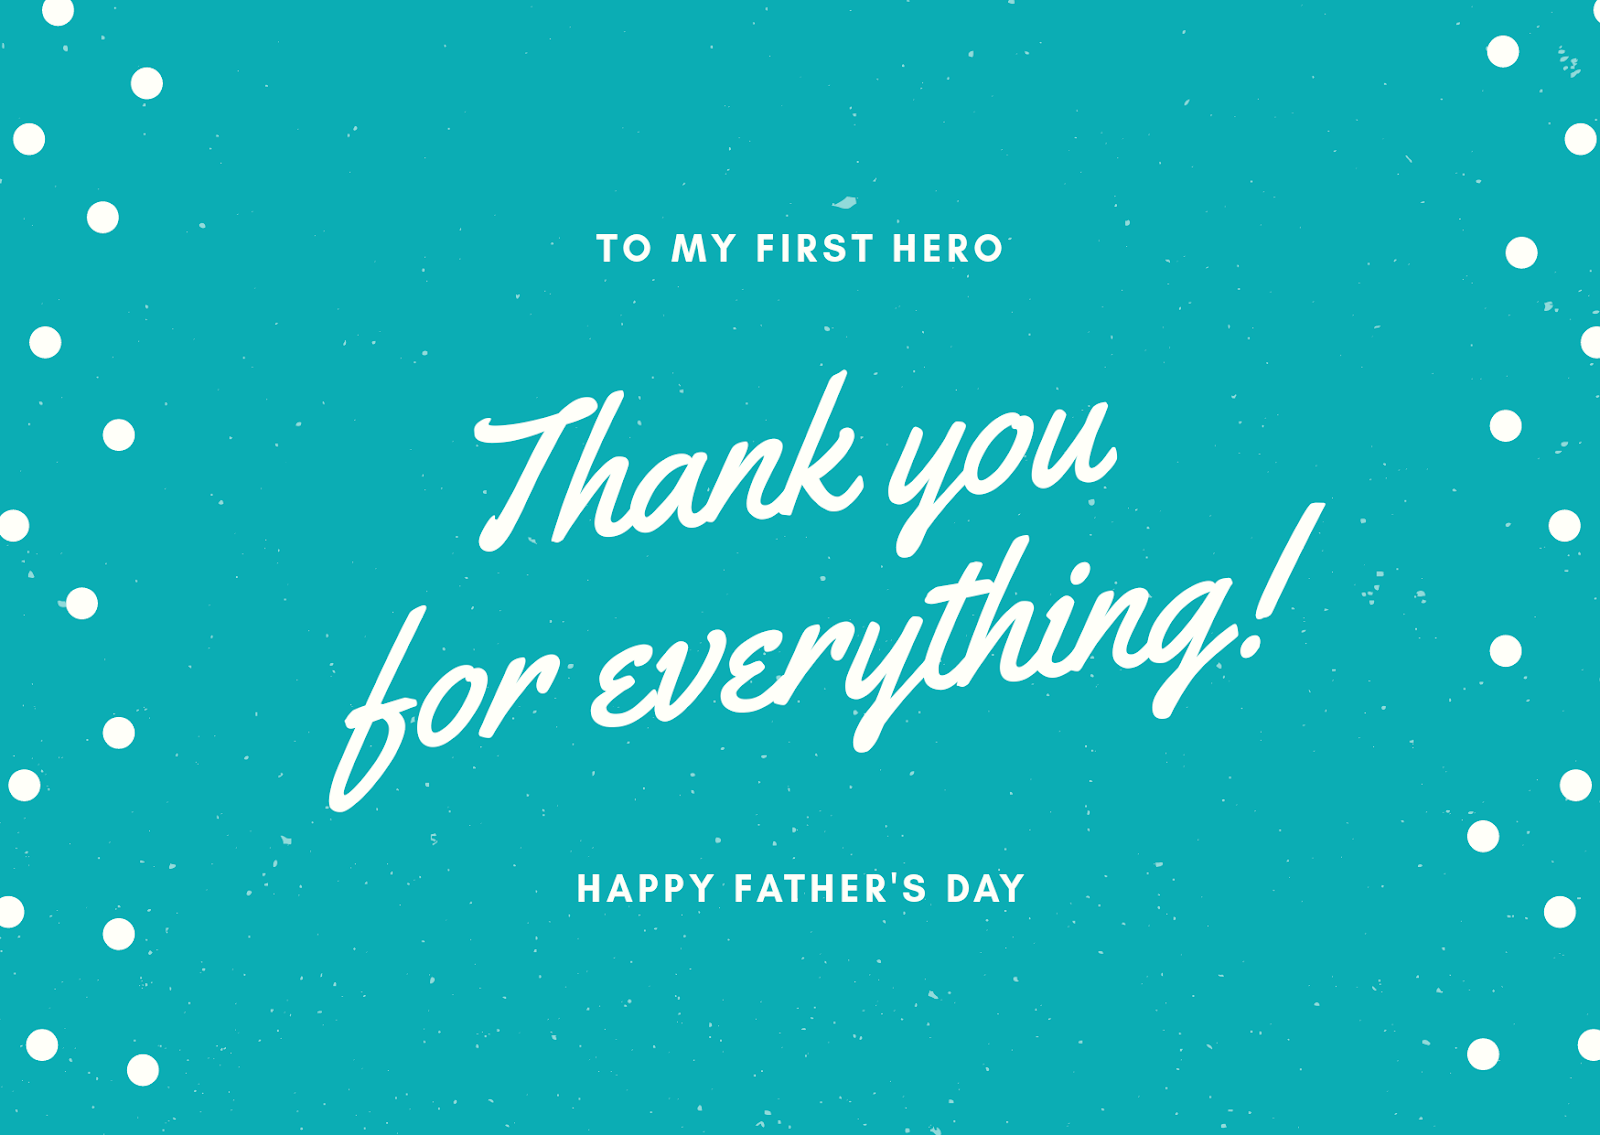 Happy Fathers day quotes with images